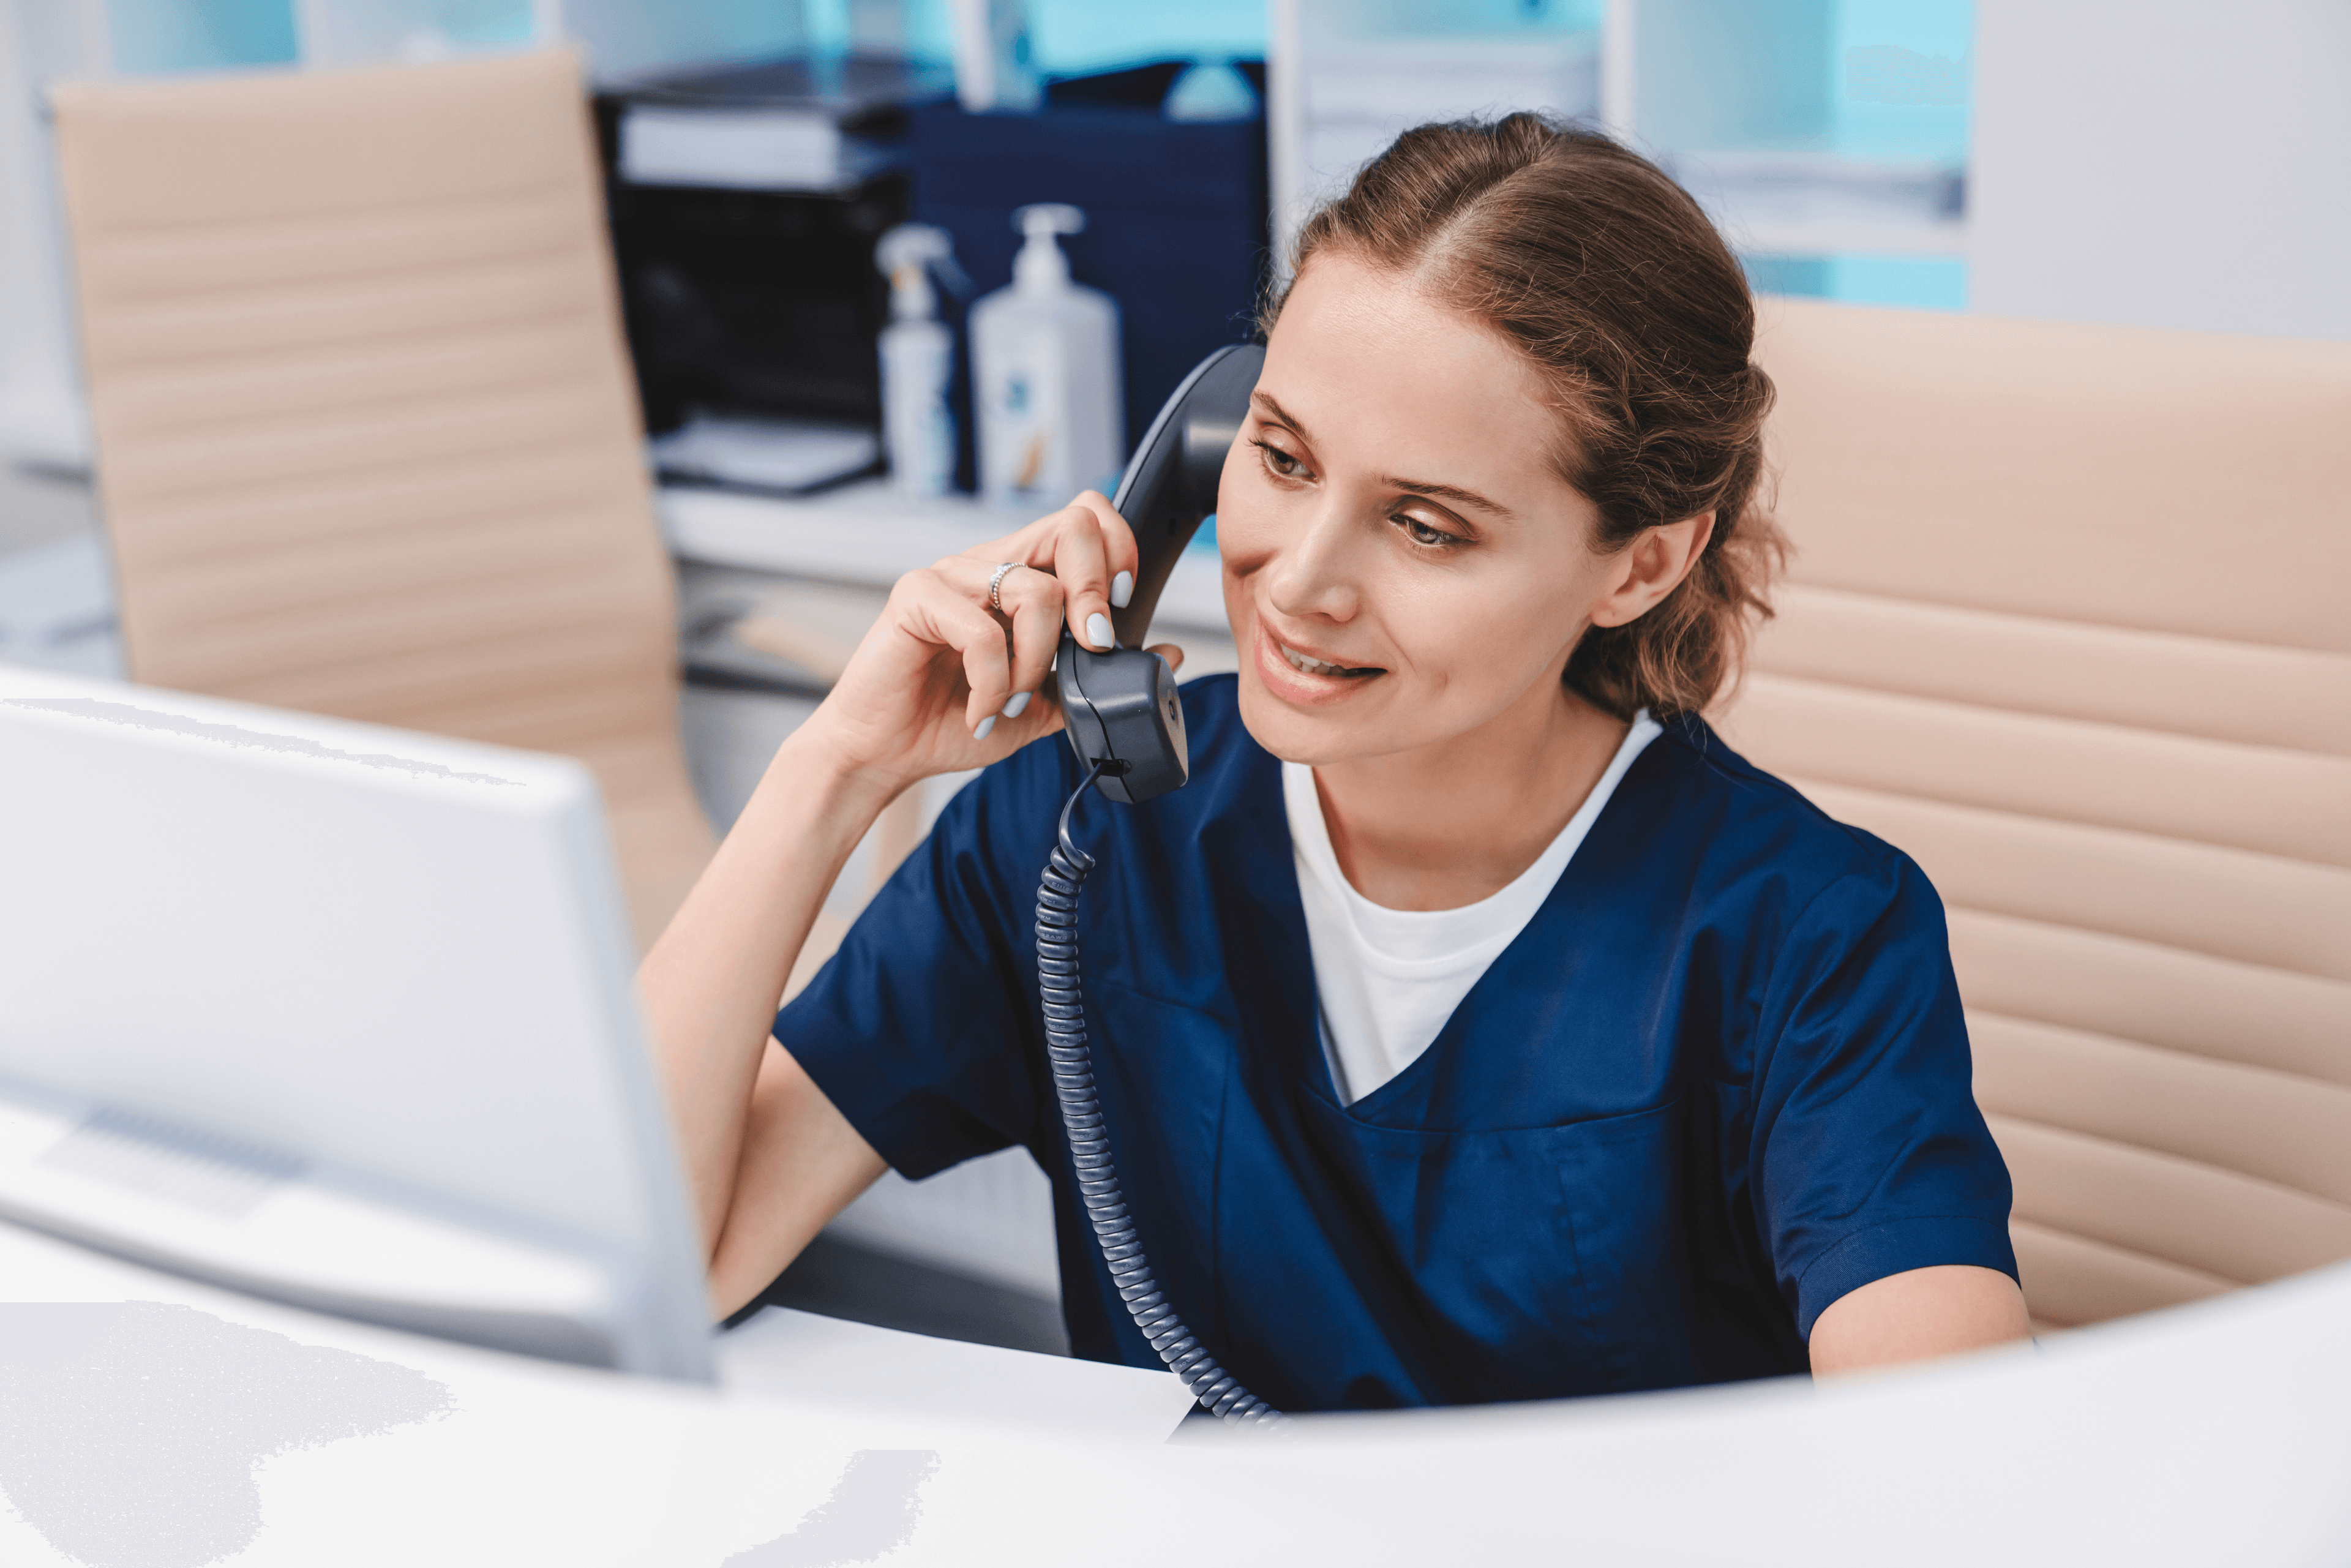 A woman in scrubs speaking on the phone